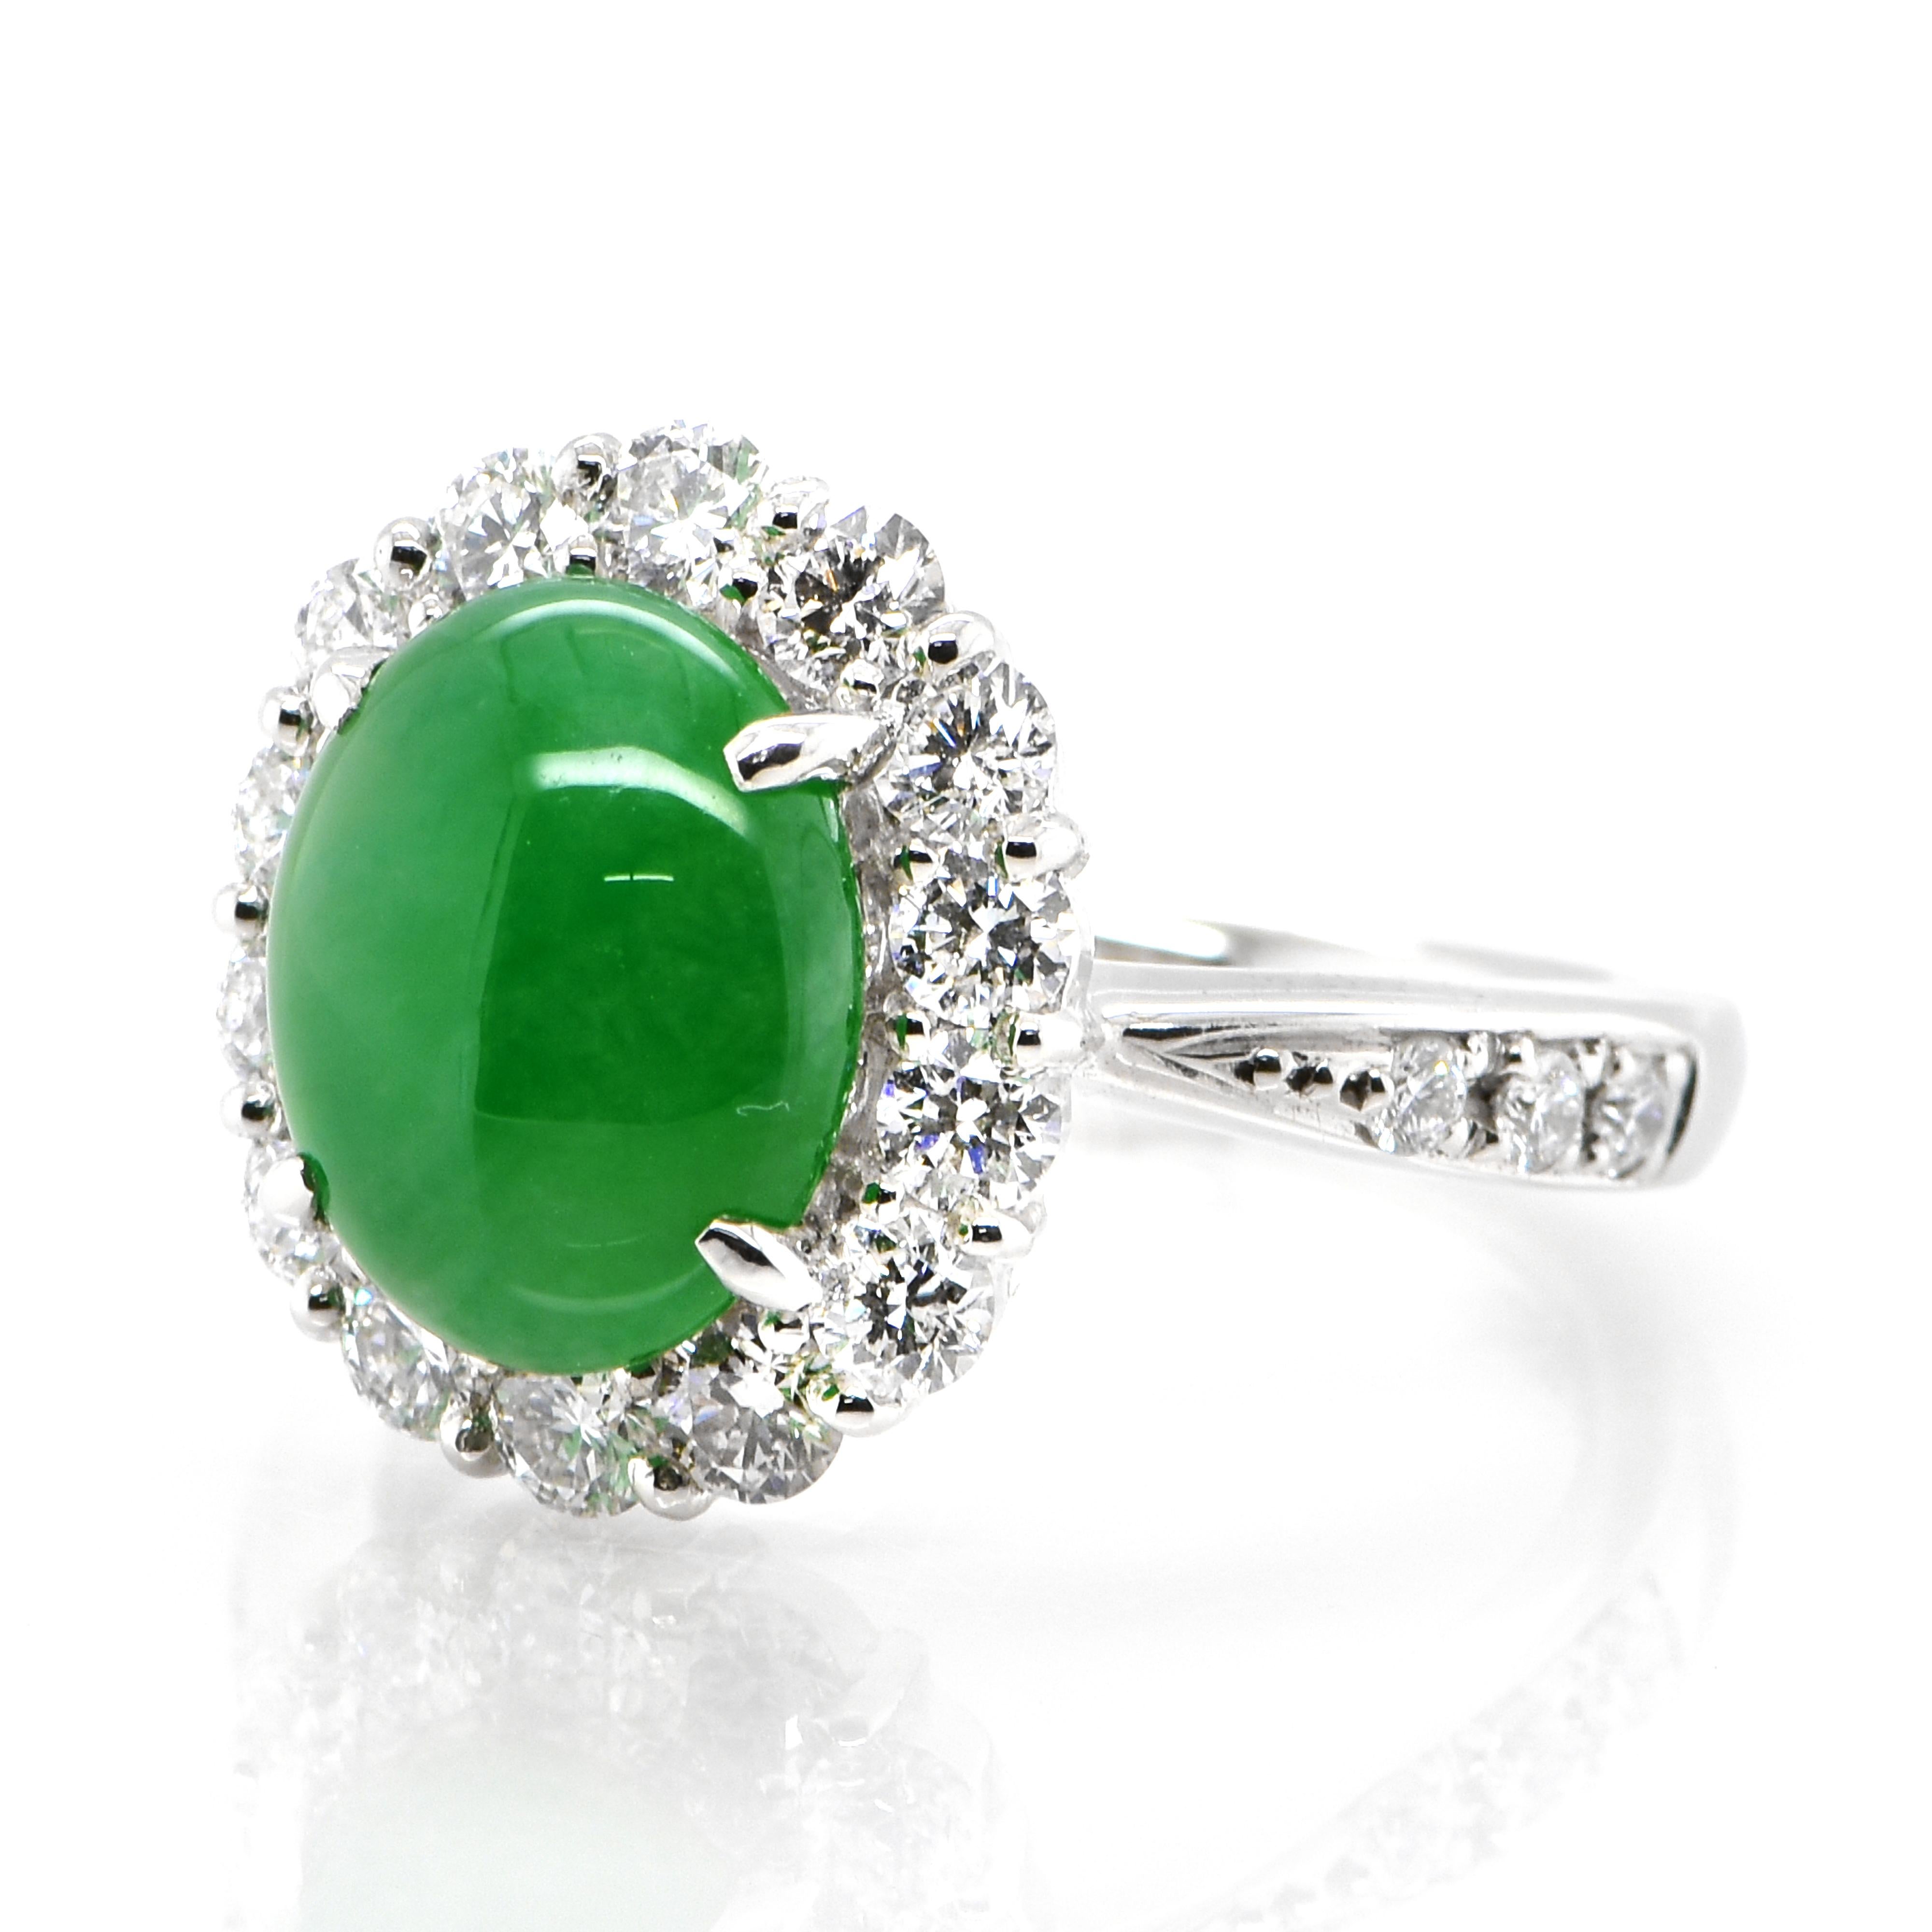 A beautiful Ring featuring a 3.049 Carat, Natural, Non-dyed Jadeite and 1.005 Carats of Diamond Accents set in Platinum. Jadeite has been cherished for millennia. Its nature is pure and enduring, yet sensuous and luxurious. Jadeite’s exceptional